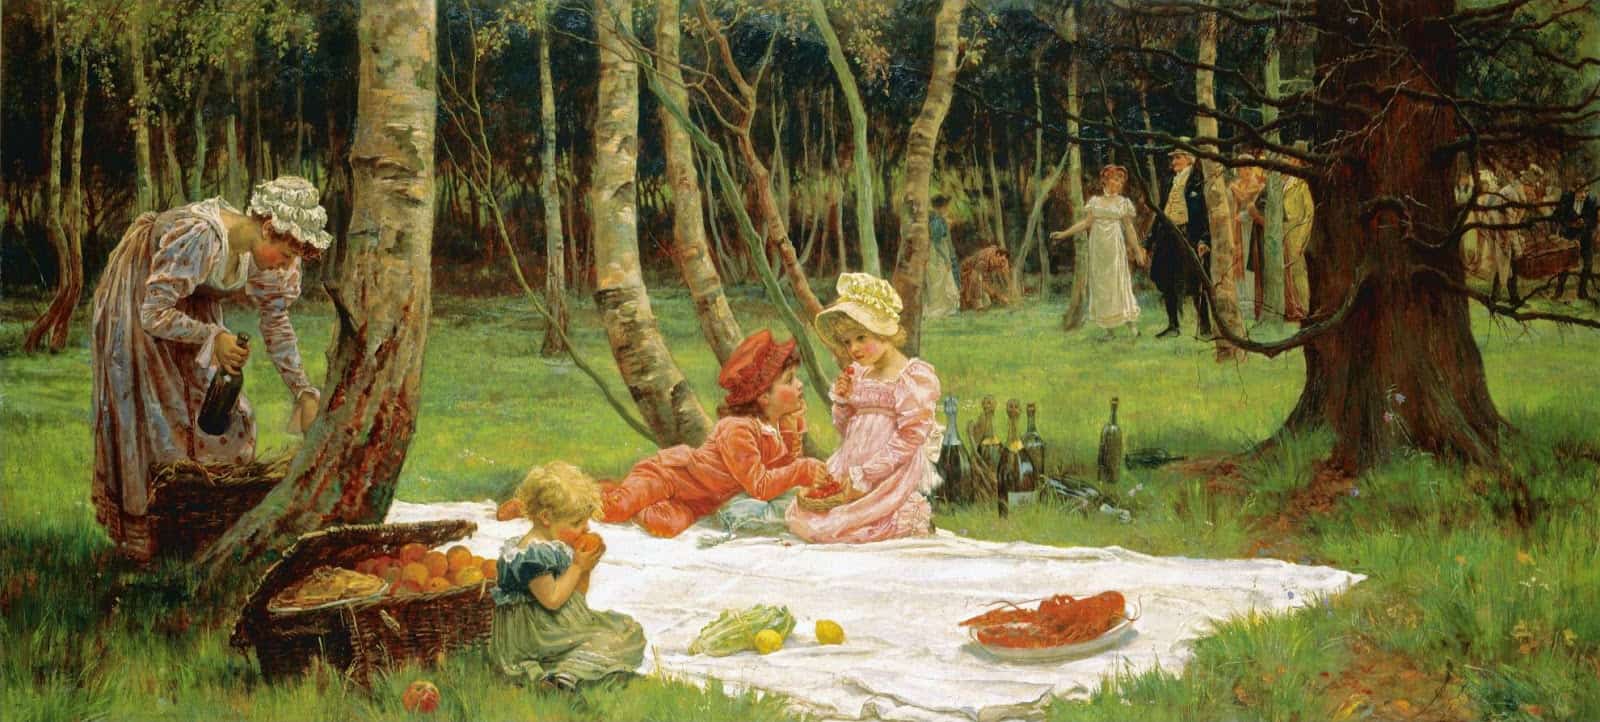 Picnics In Art and Storytelling